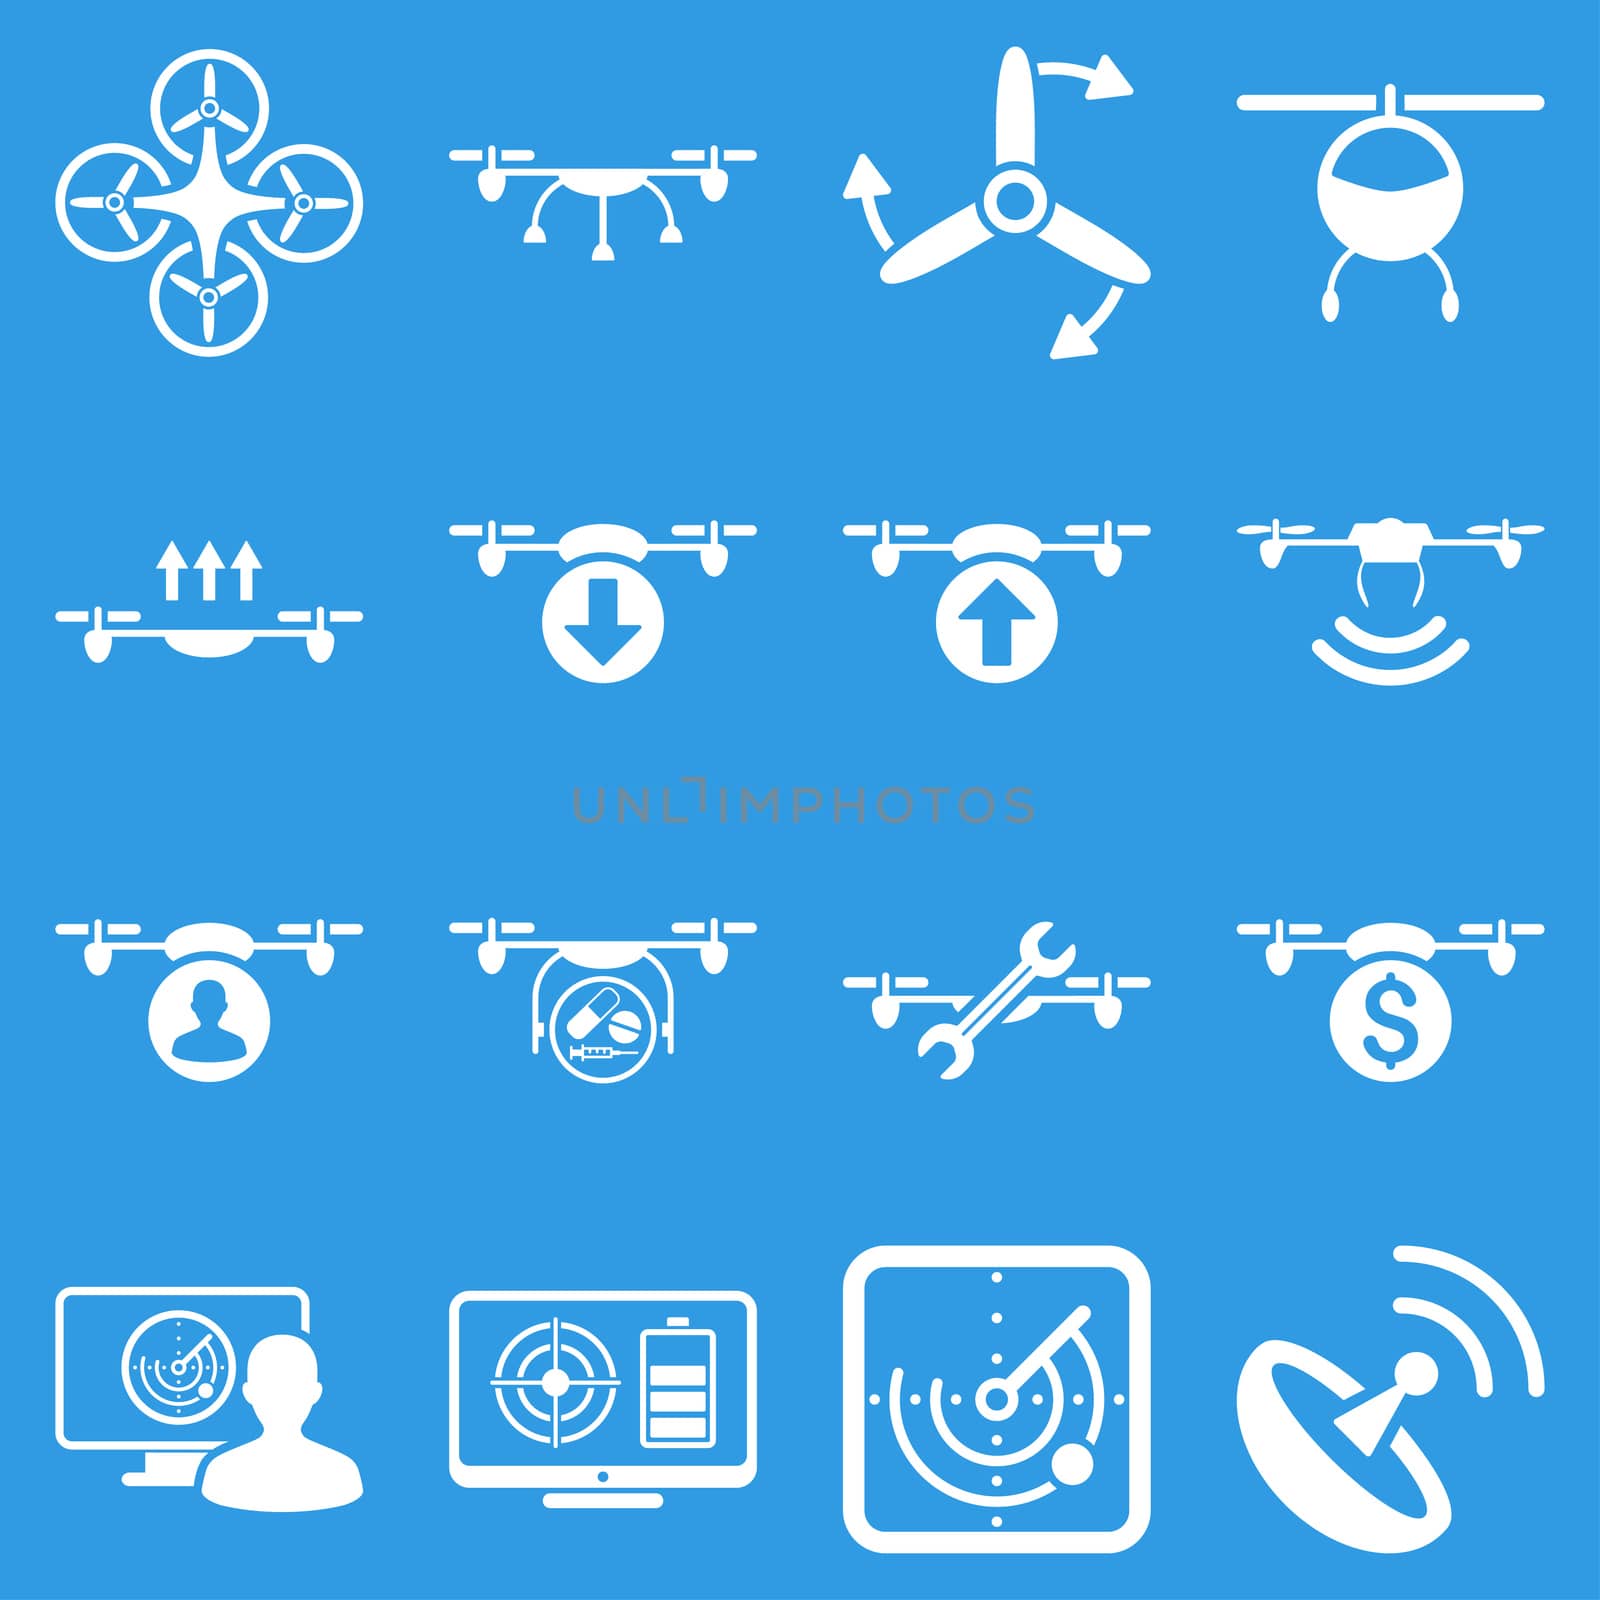 Quadcopter service icon set designed with white color. These flat pictograms are isolated on a blue background.